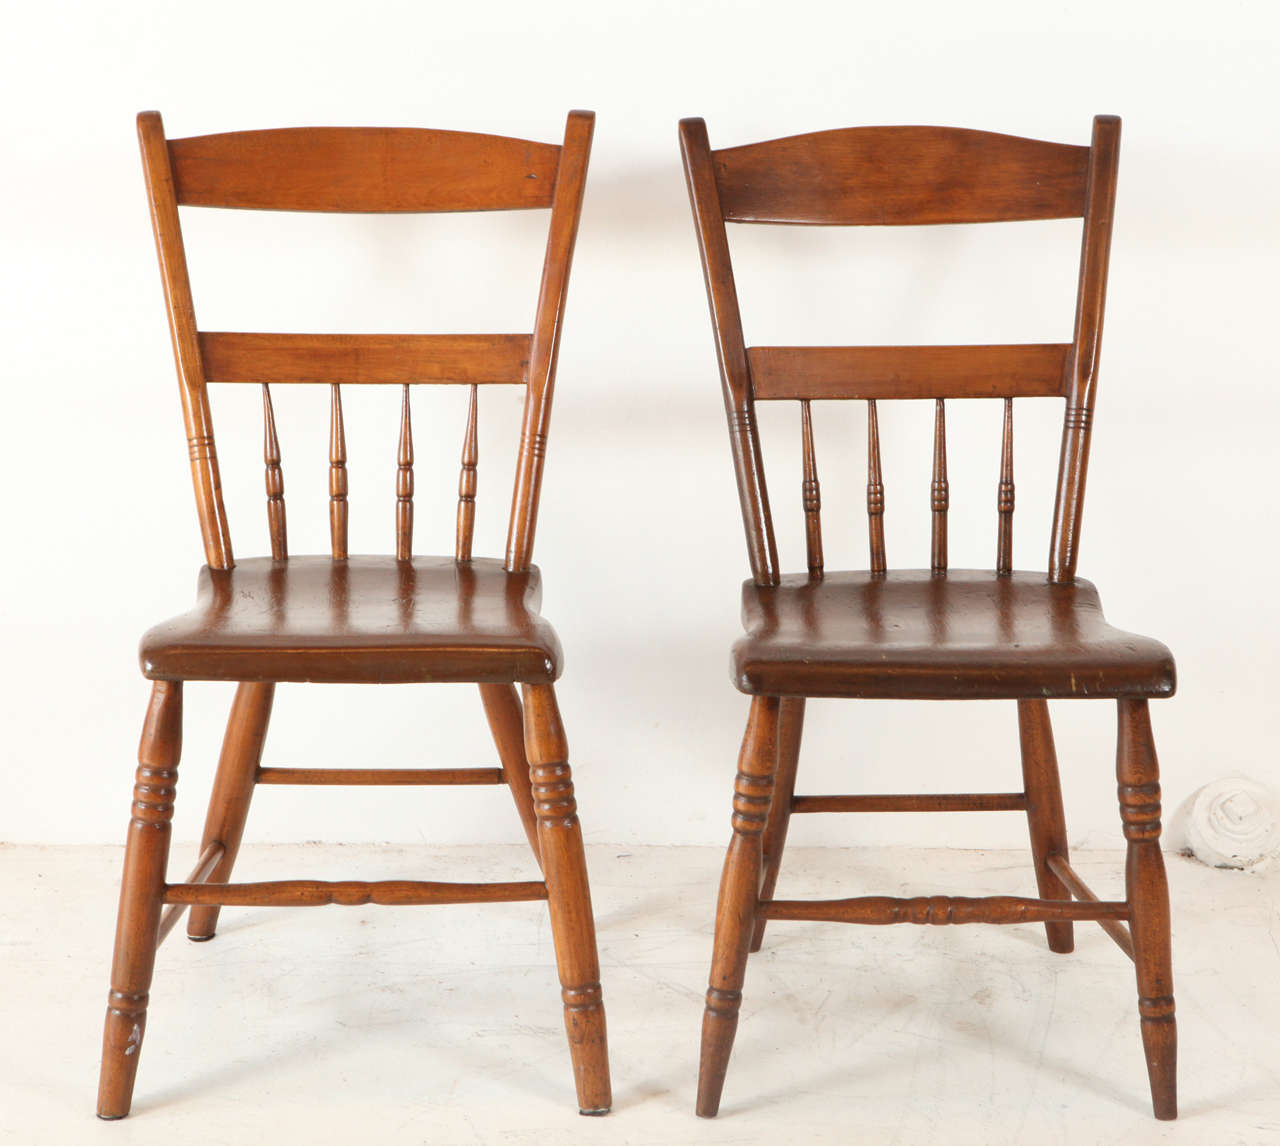 Charming American pine spindle back dining chairs. Note: there is a slight variation in the spindle detail.